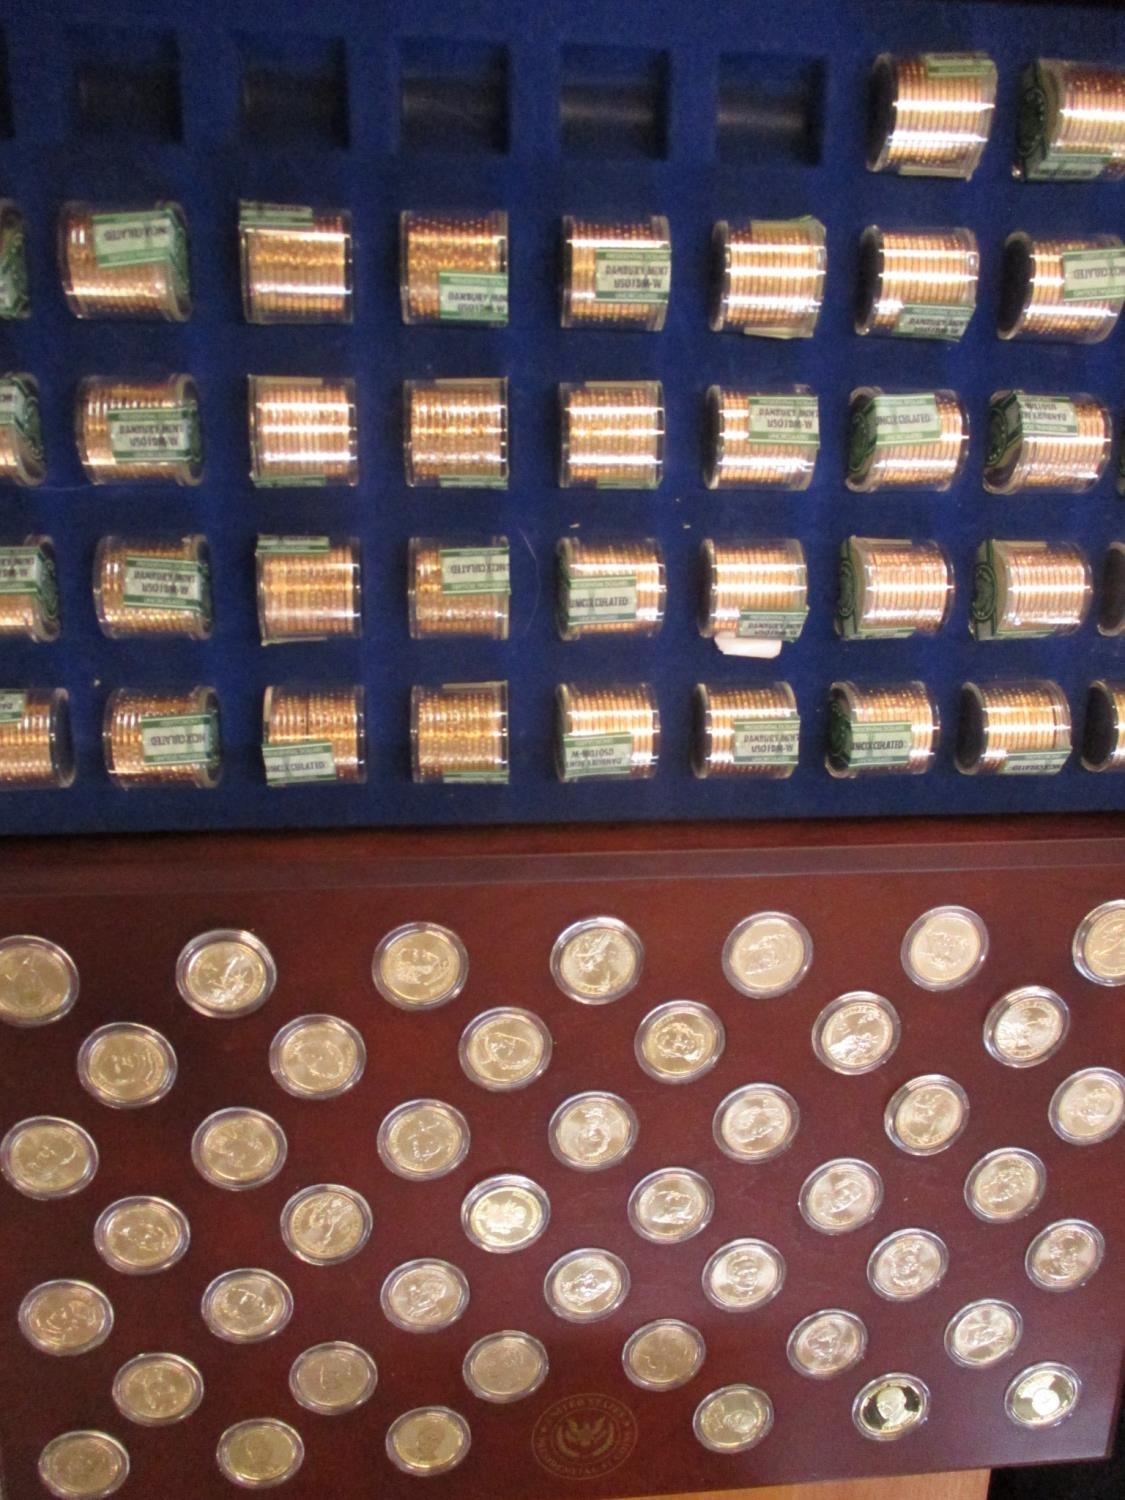 A United States Presidential Coins contained in a mahogany finished case